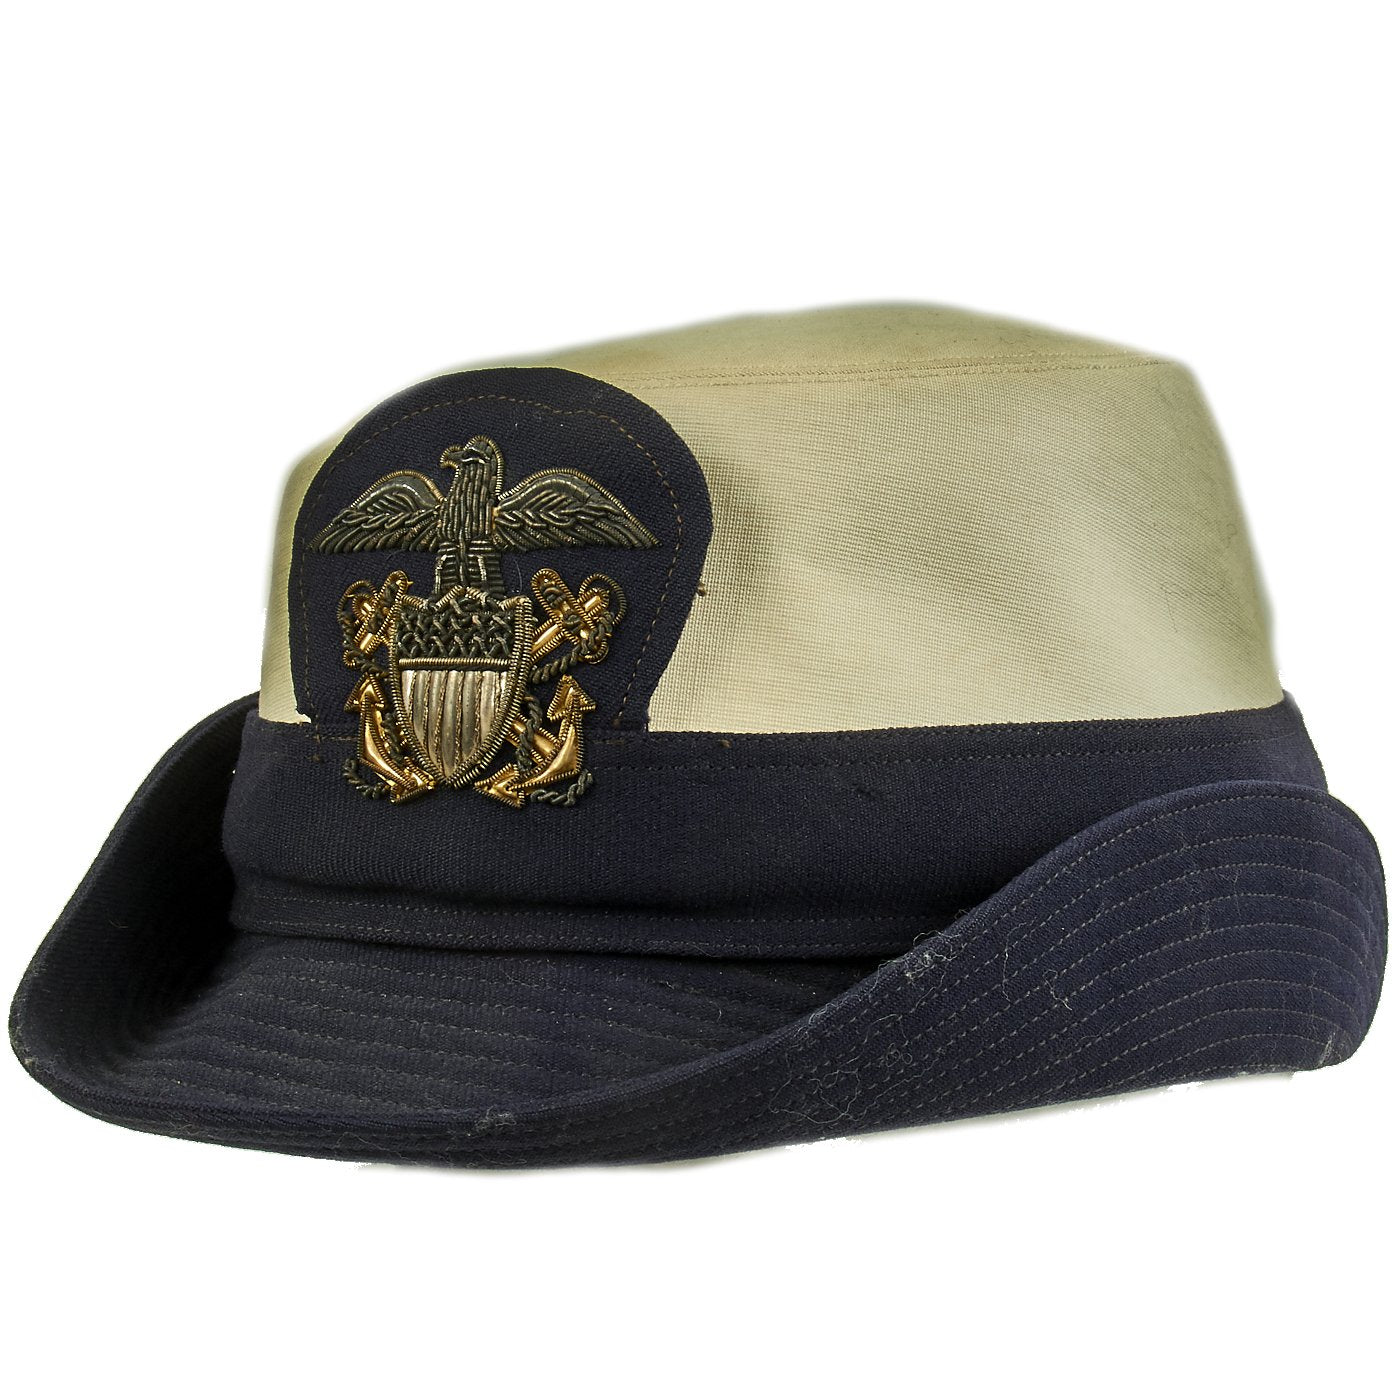 Original U.S. Navy WWII WAVES Named Officer Service Cap with